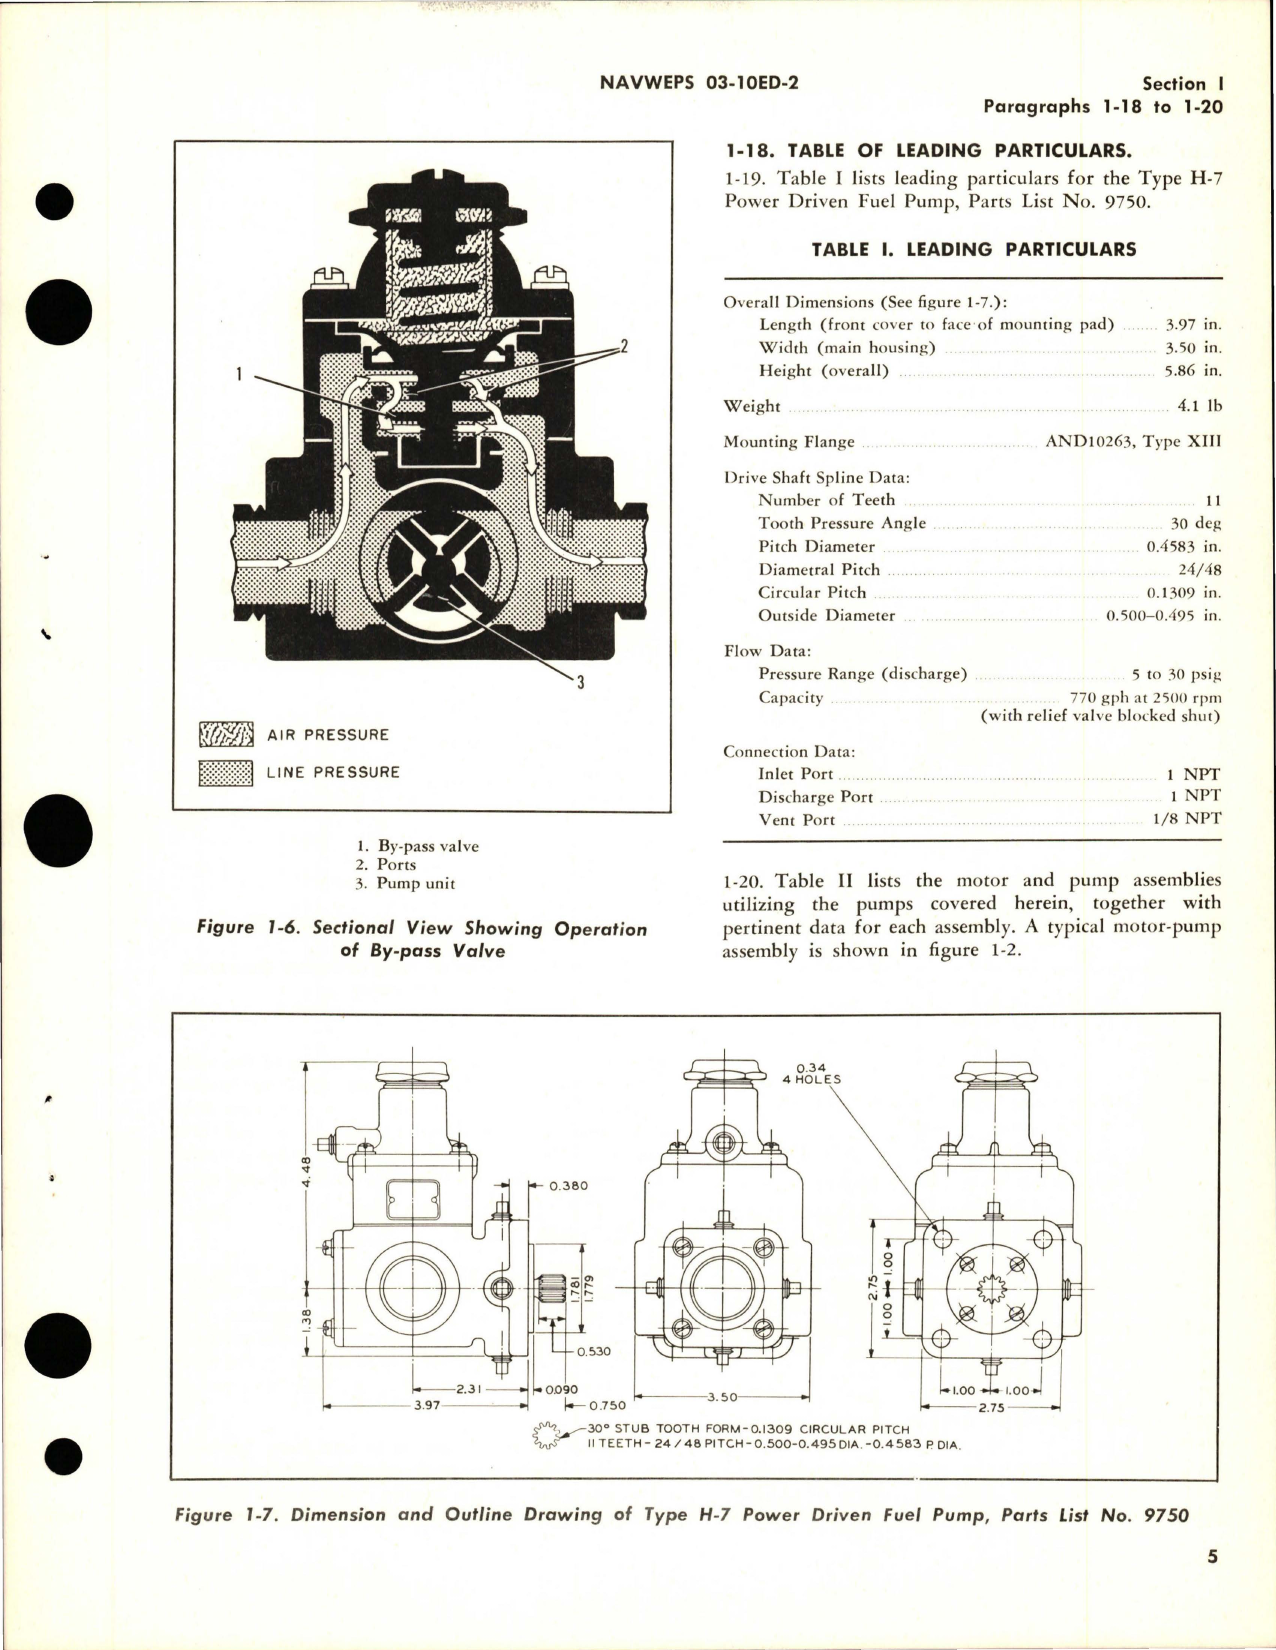 Sample page 9 from AirCorps Library document: Overhaul Instructions for Fuel and Water Pumps - Types F-10, H-2, H-4, and H-7